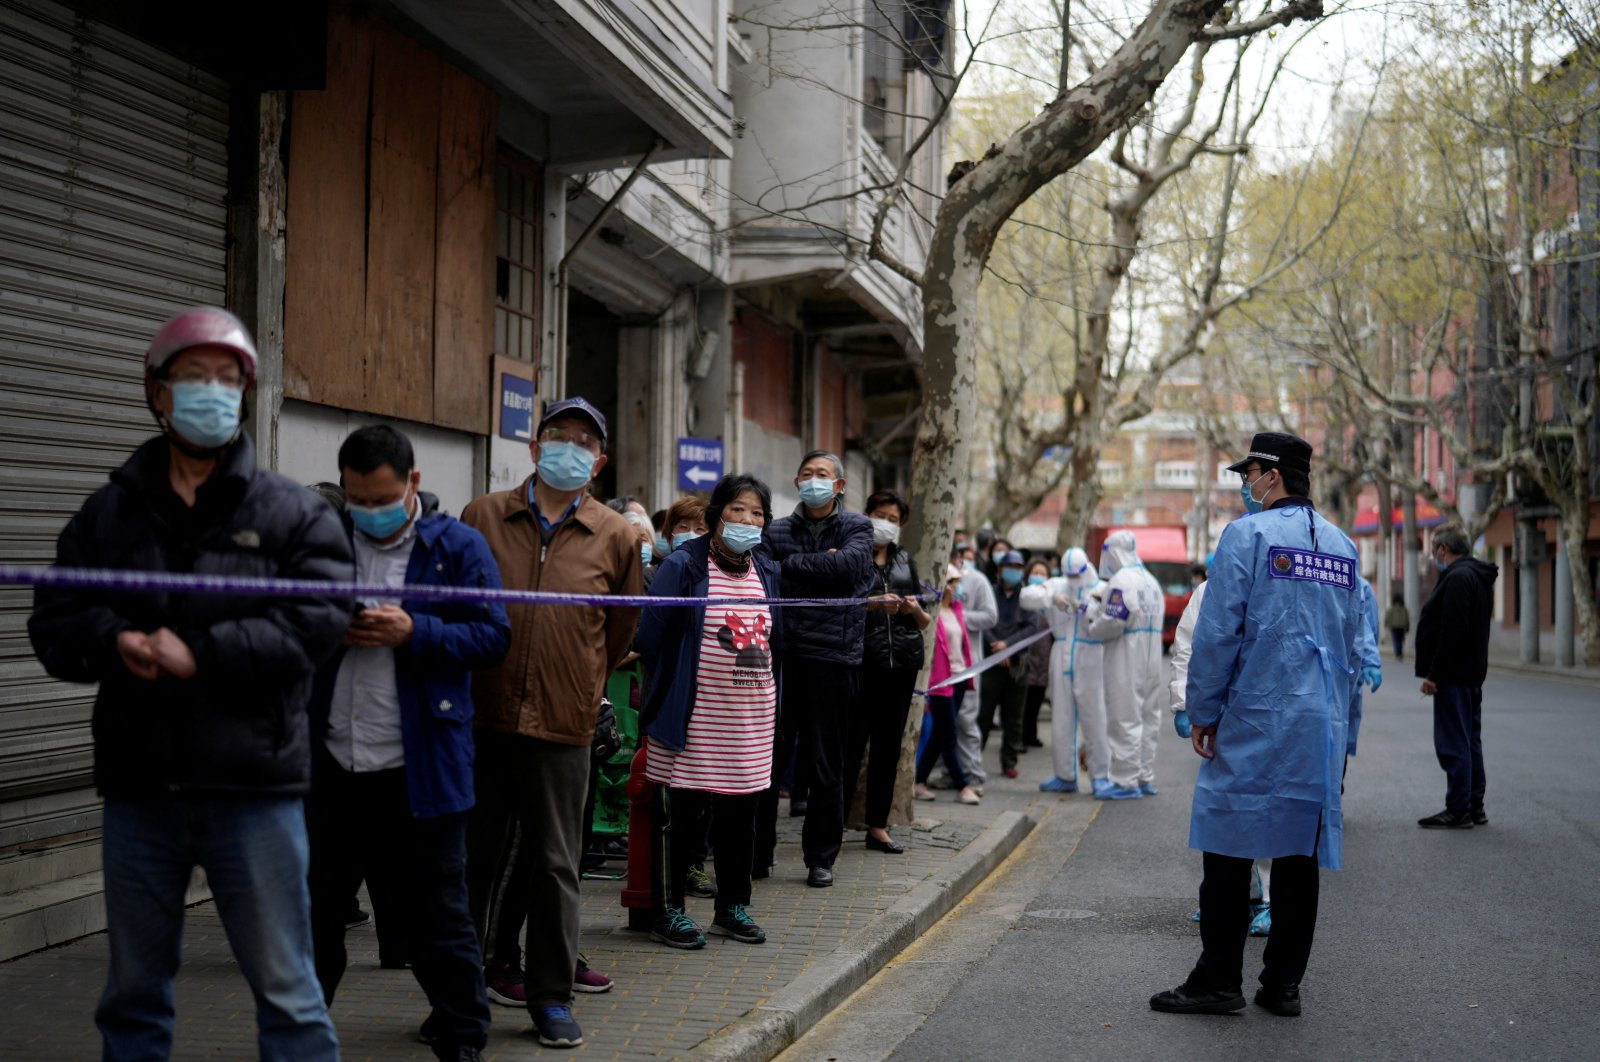 Police officers in protective suits set up cordon next to people lining up to buy food, following COVID-19 outbreak in Shanghai, China, March 30, 2022. (Reuters Photo)